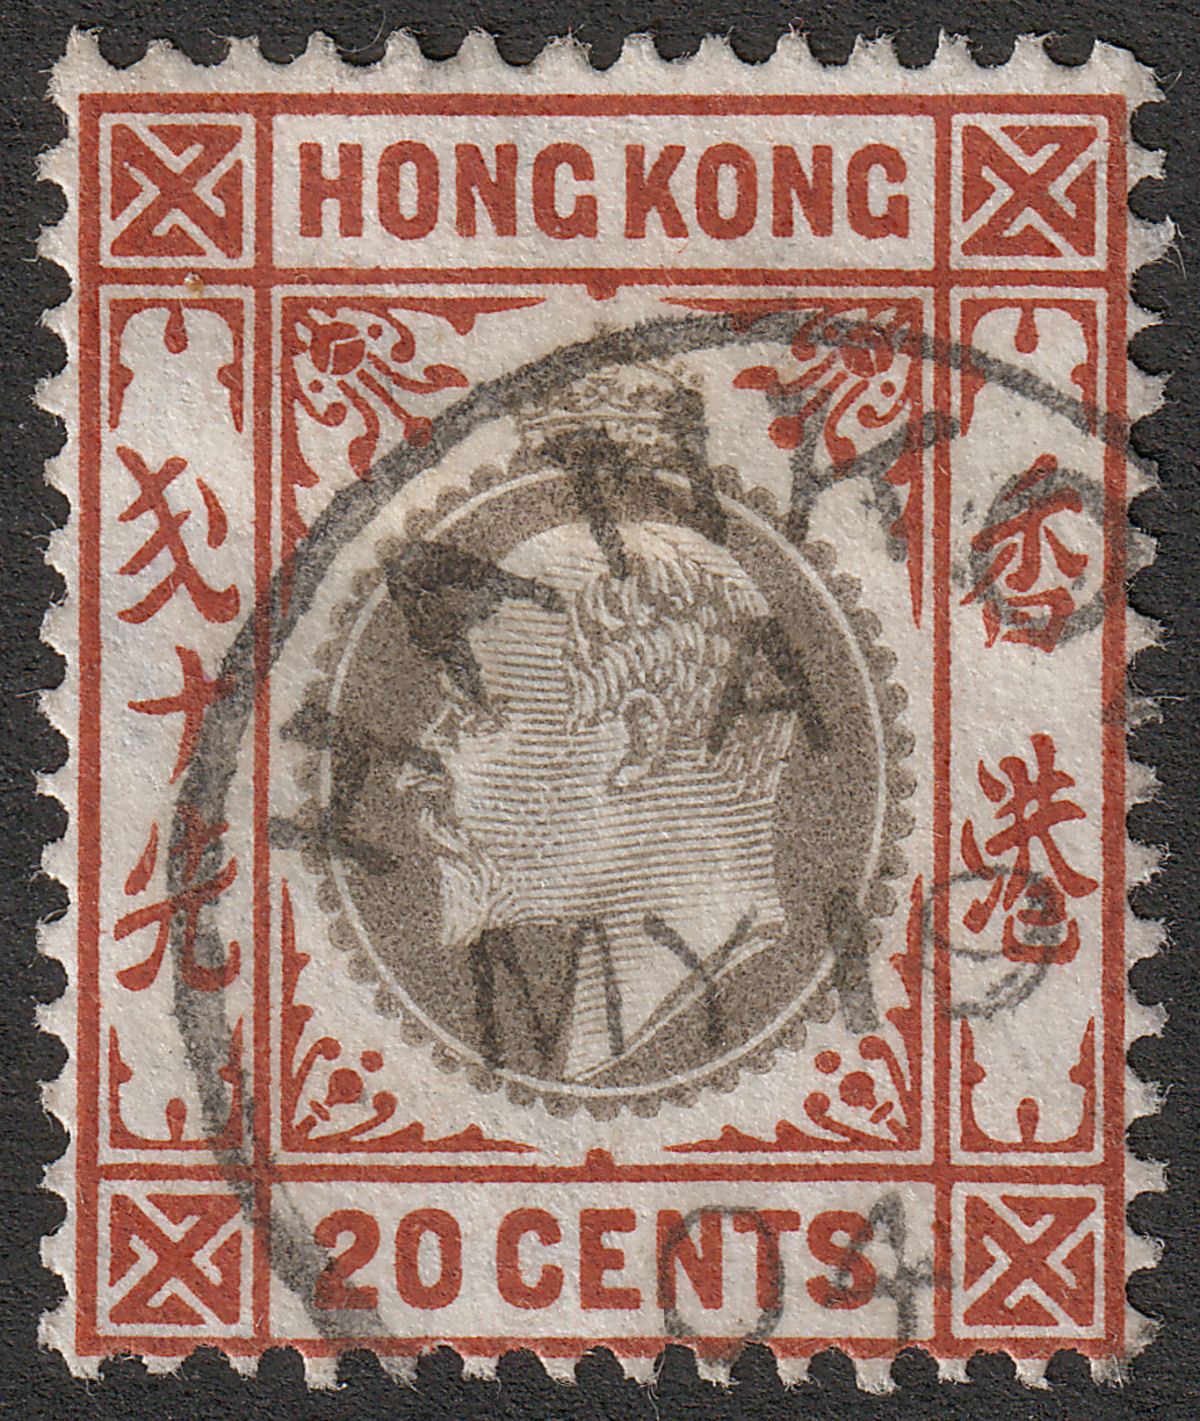 Hong Kong 1904 KEVII 20c Used with HANKOW code A postmark SG Z482 cat £20